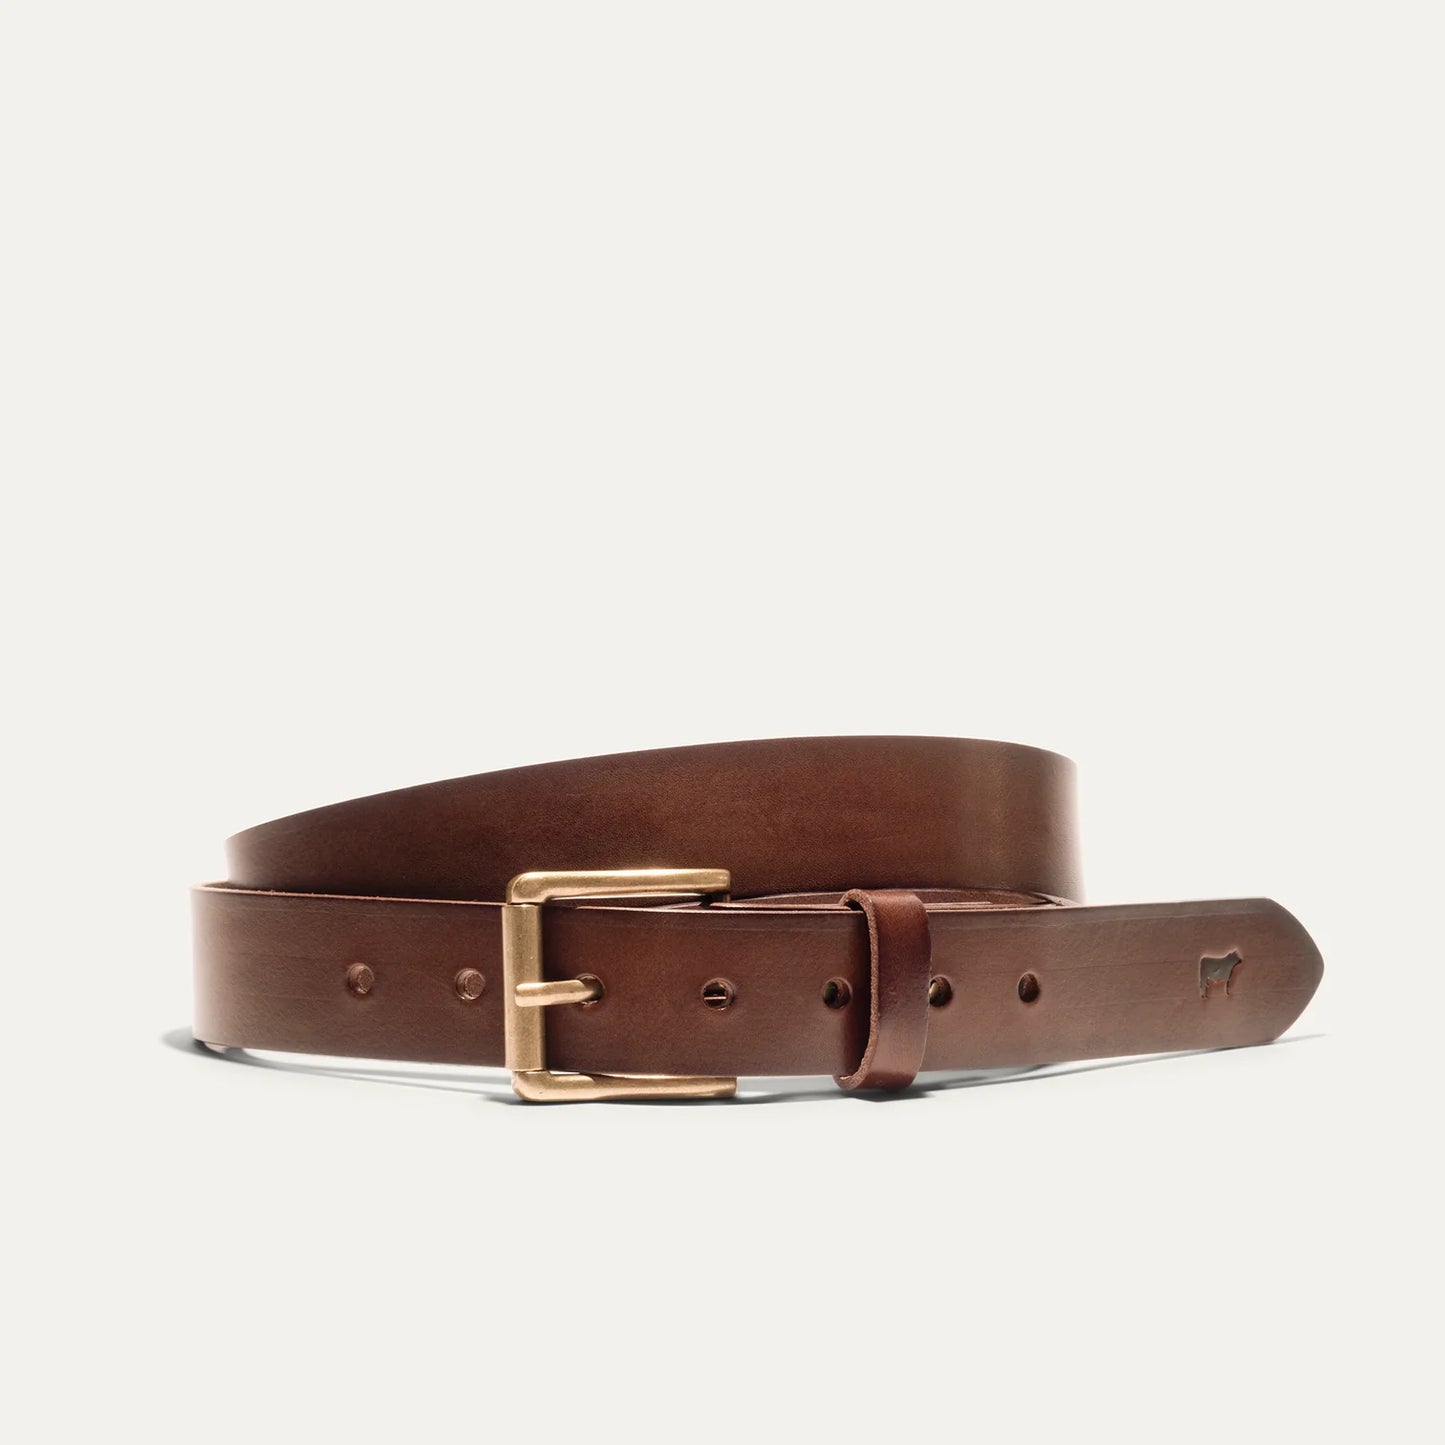 Will Leather Goods Saddle Belt - Brown